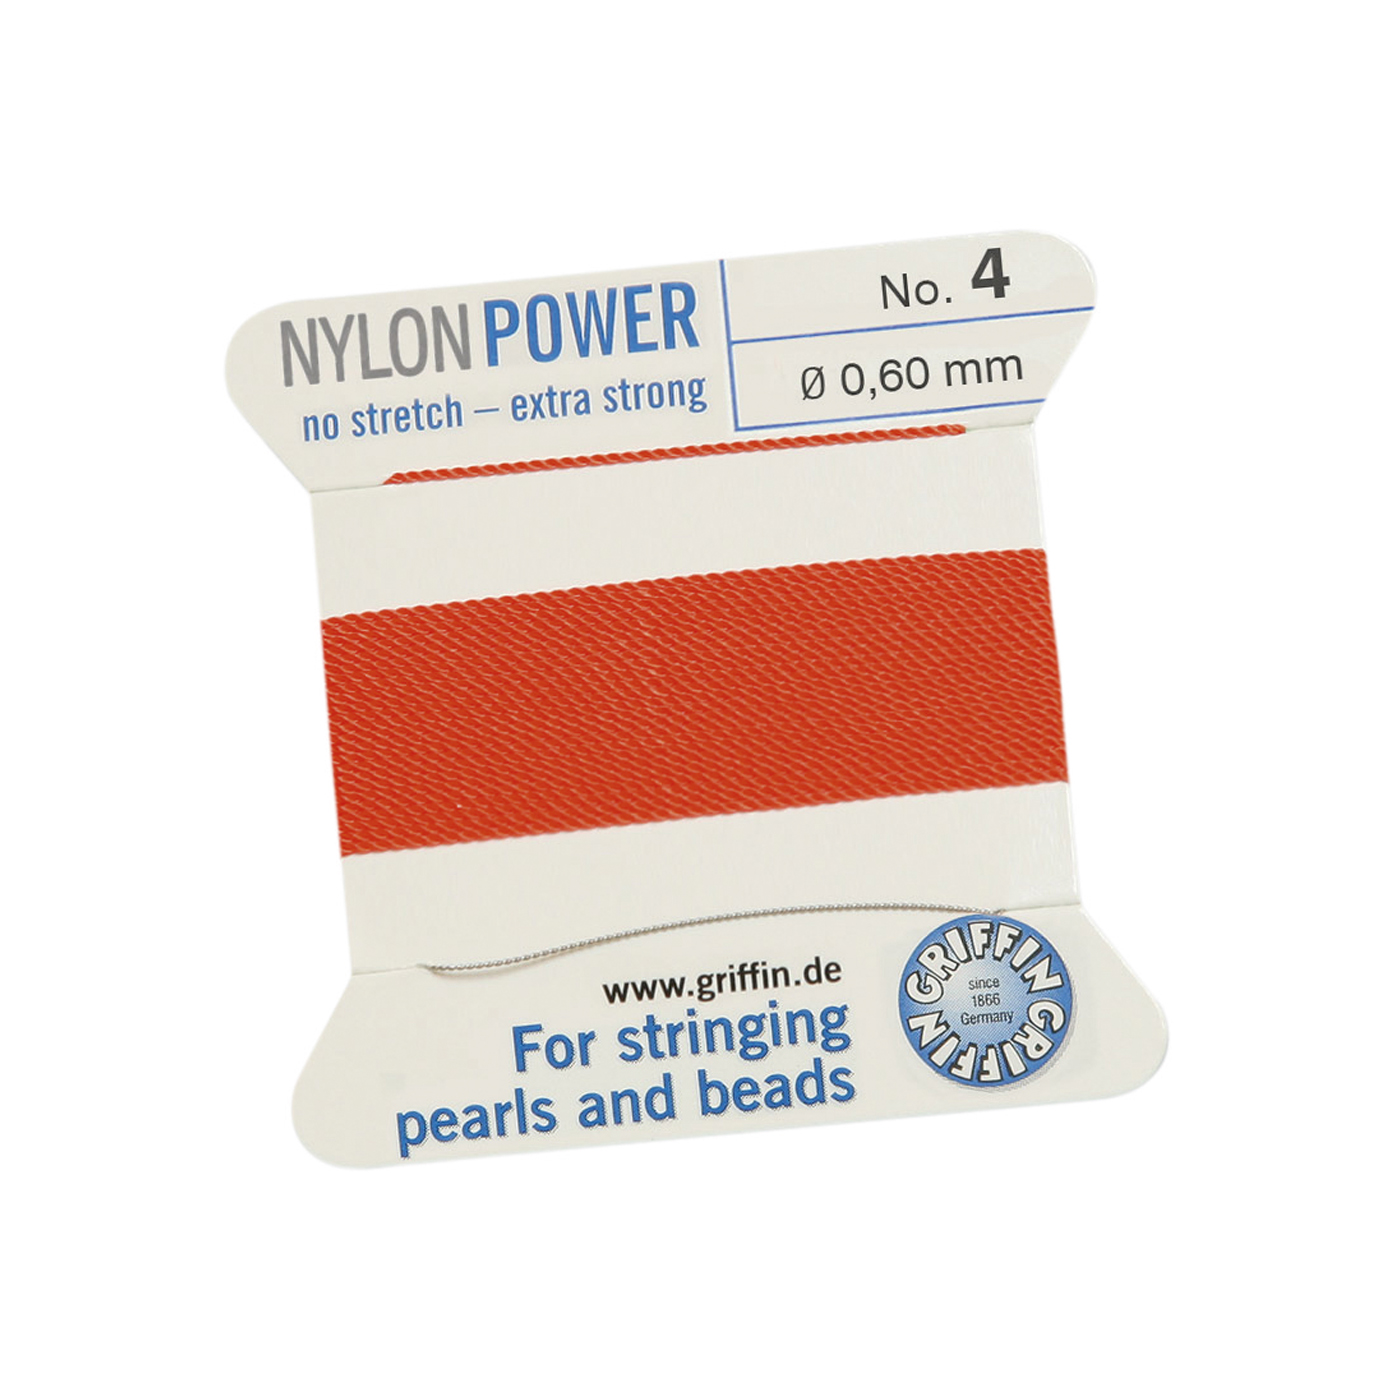 Bead Cord NylonPower, Coral Red, No. 4 - 2 m